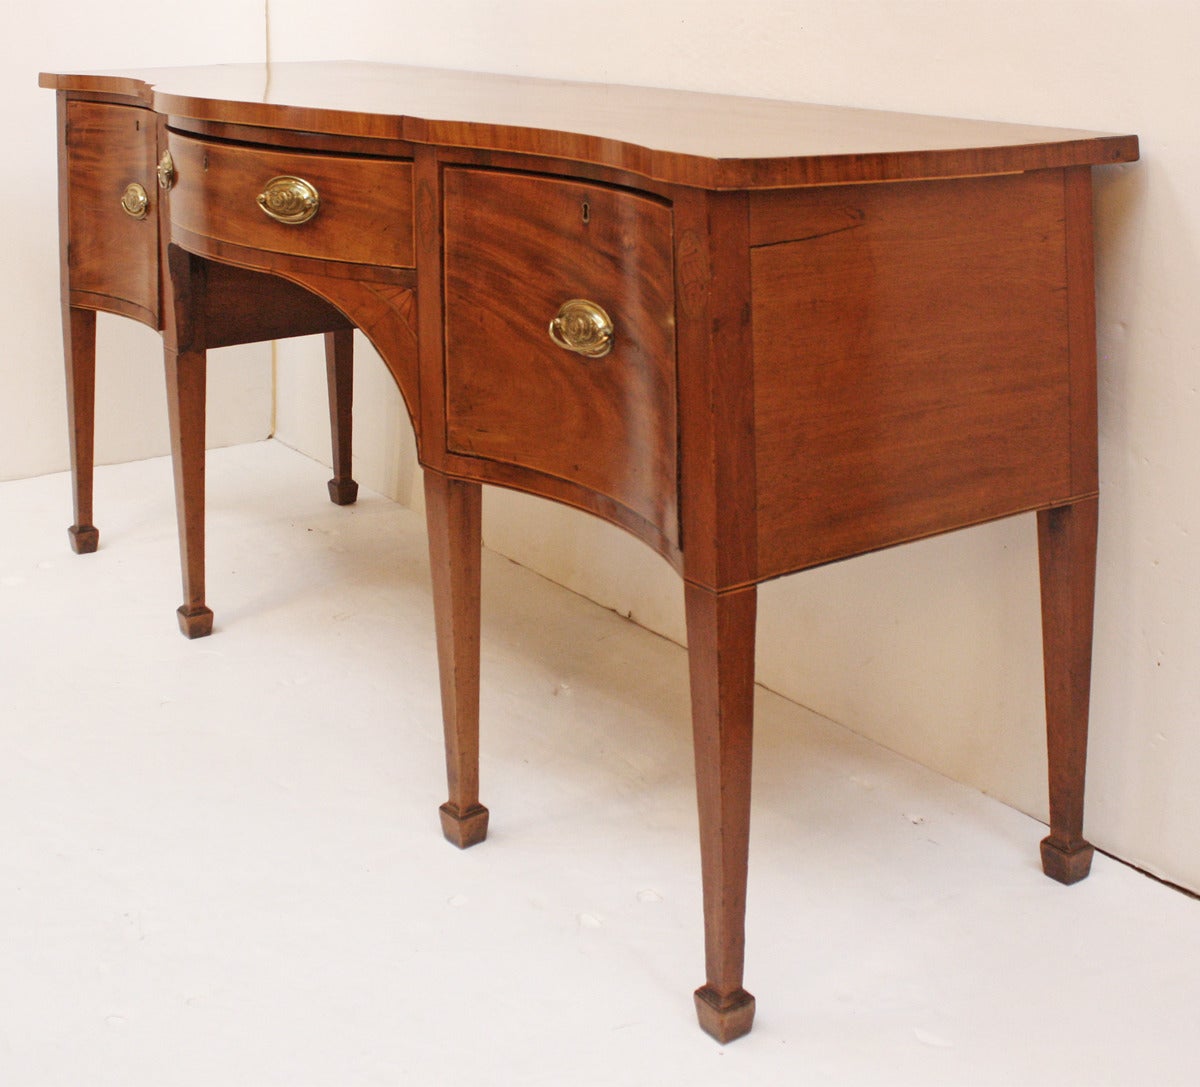 an English Georgian serpentine front mahogany sideboard with inlay banding at top corners, around each drawer, with conch shell inlay detail between drawers, straight tapered legs with spade feet.